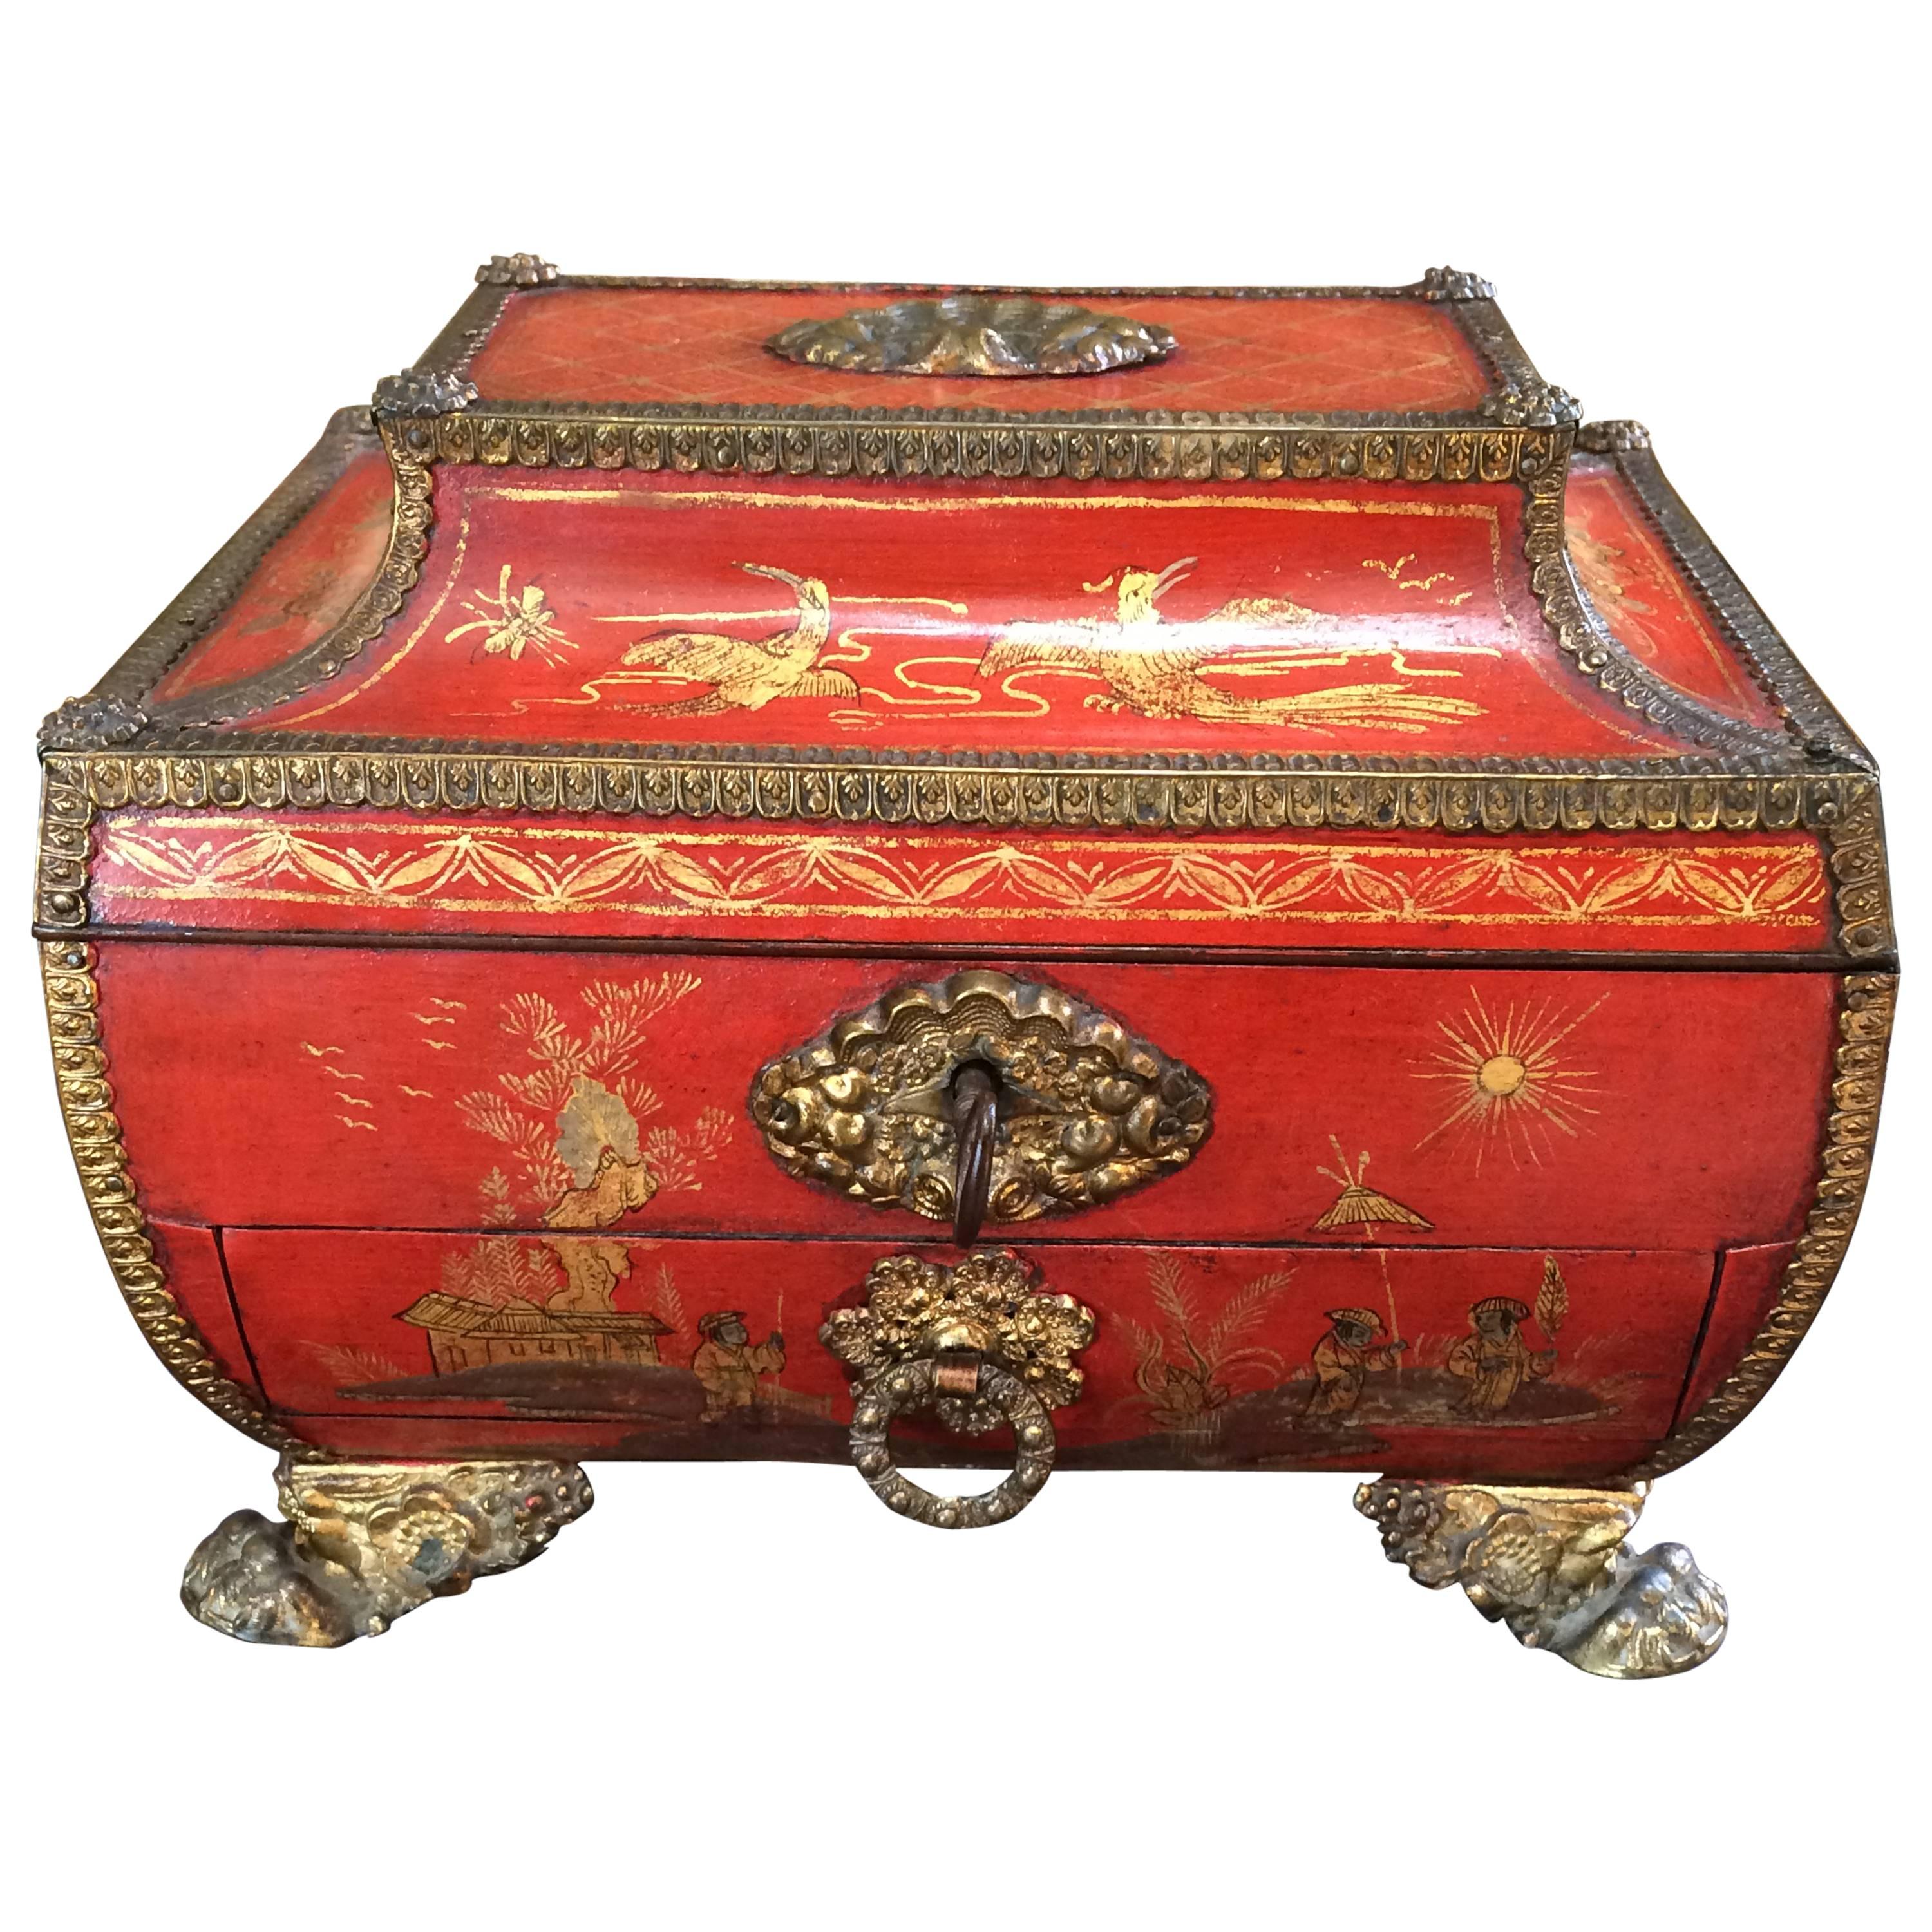 Charming Small Red Lacquered Chinoiserie Sewing Box, 19th Century